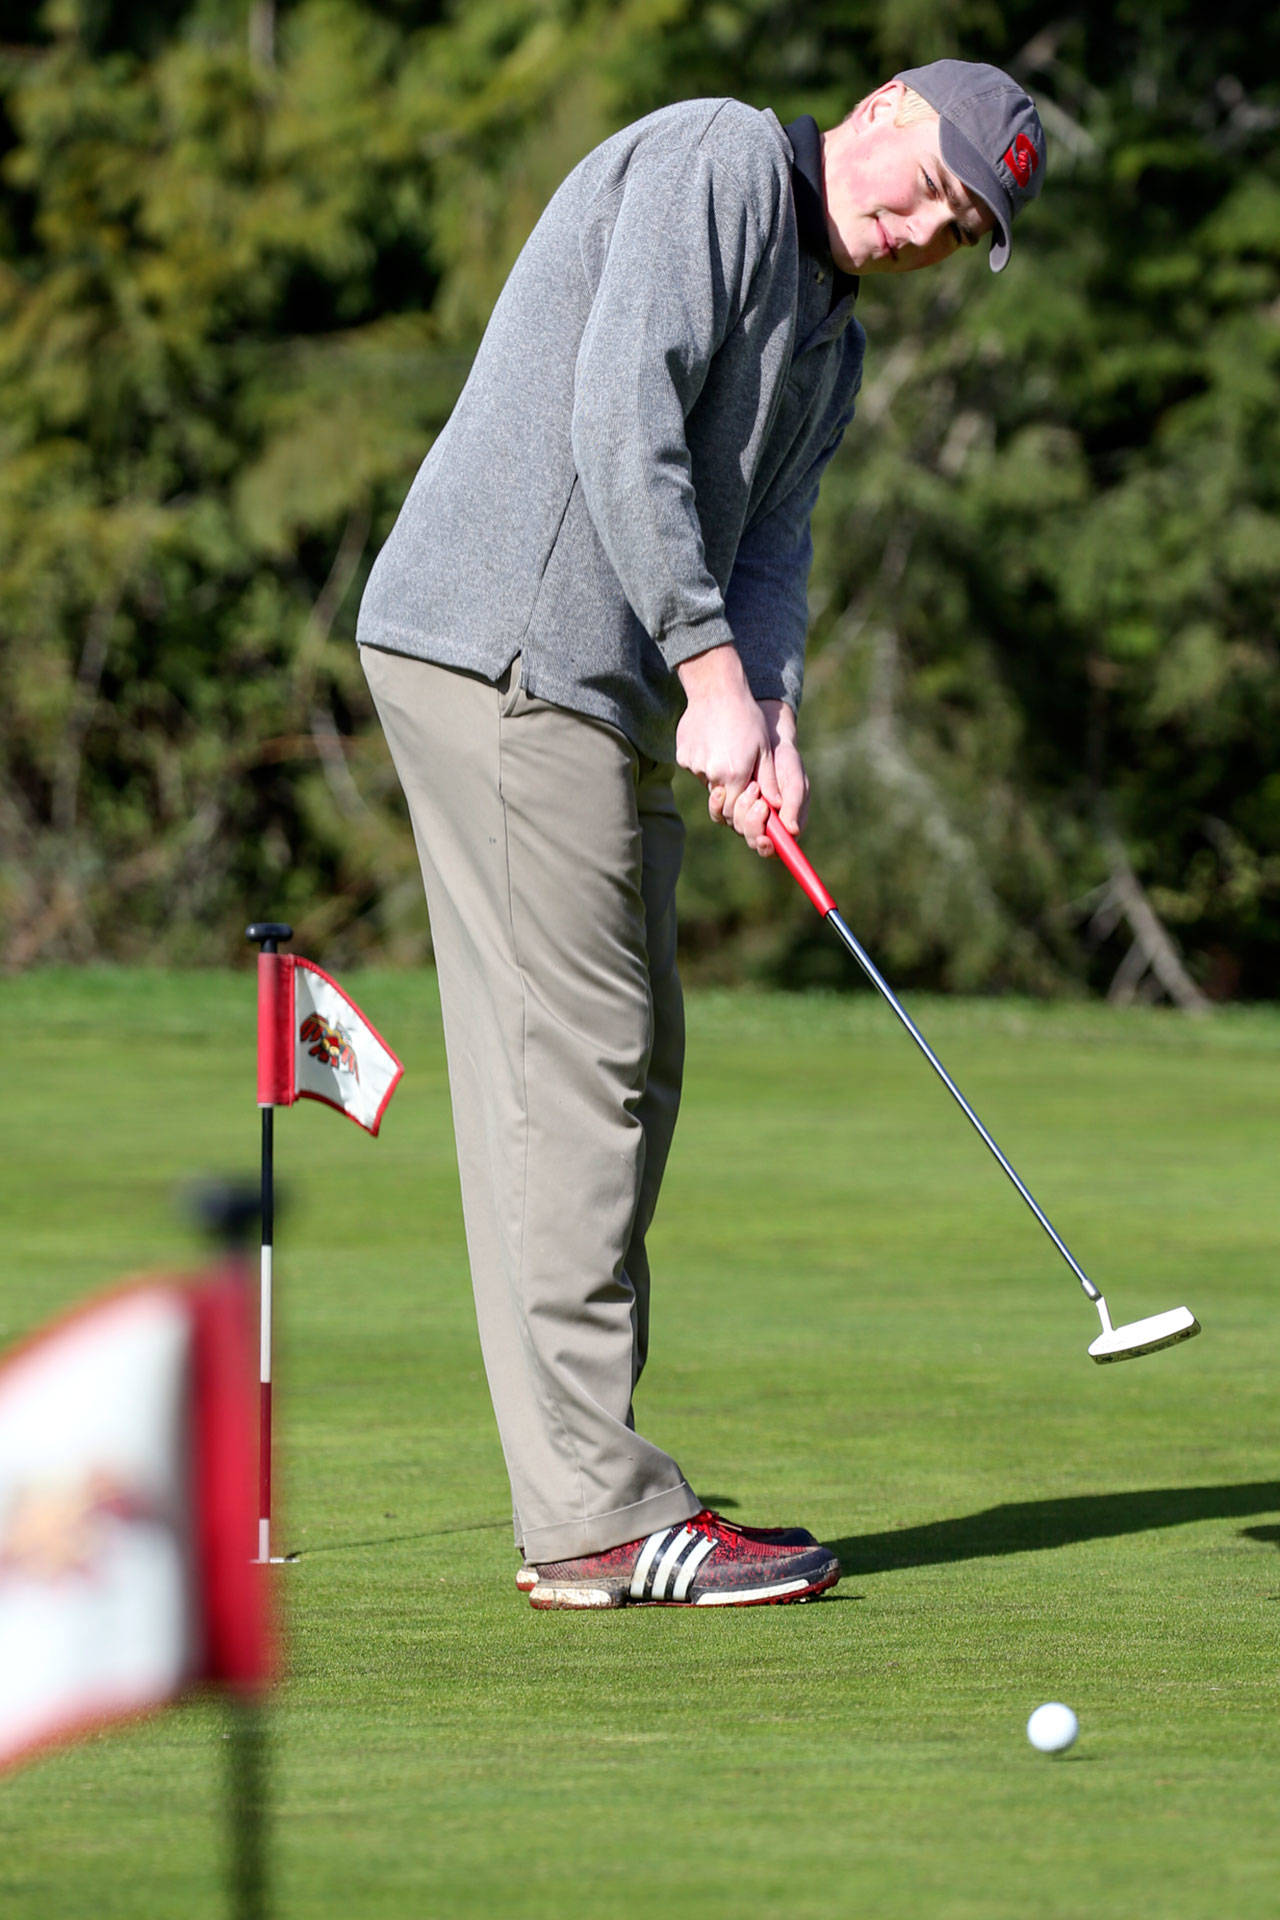 Stanwood golfer Quinton Borseth practices at Kayak Point Golf Course in Stanwood on March 16. (Kevin Clark / The Herald)